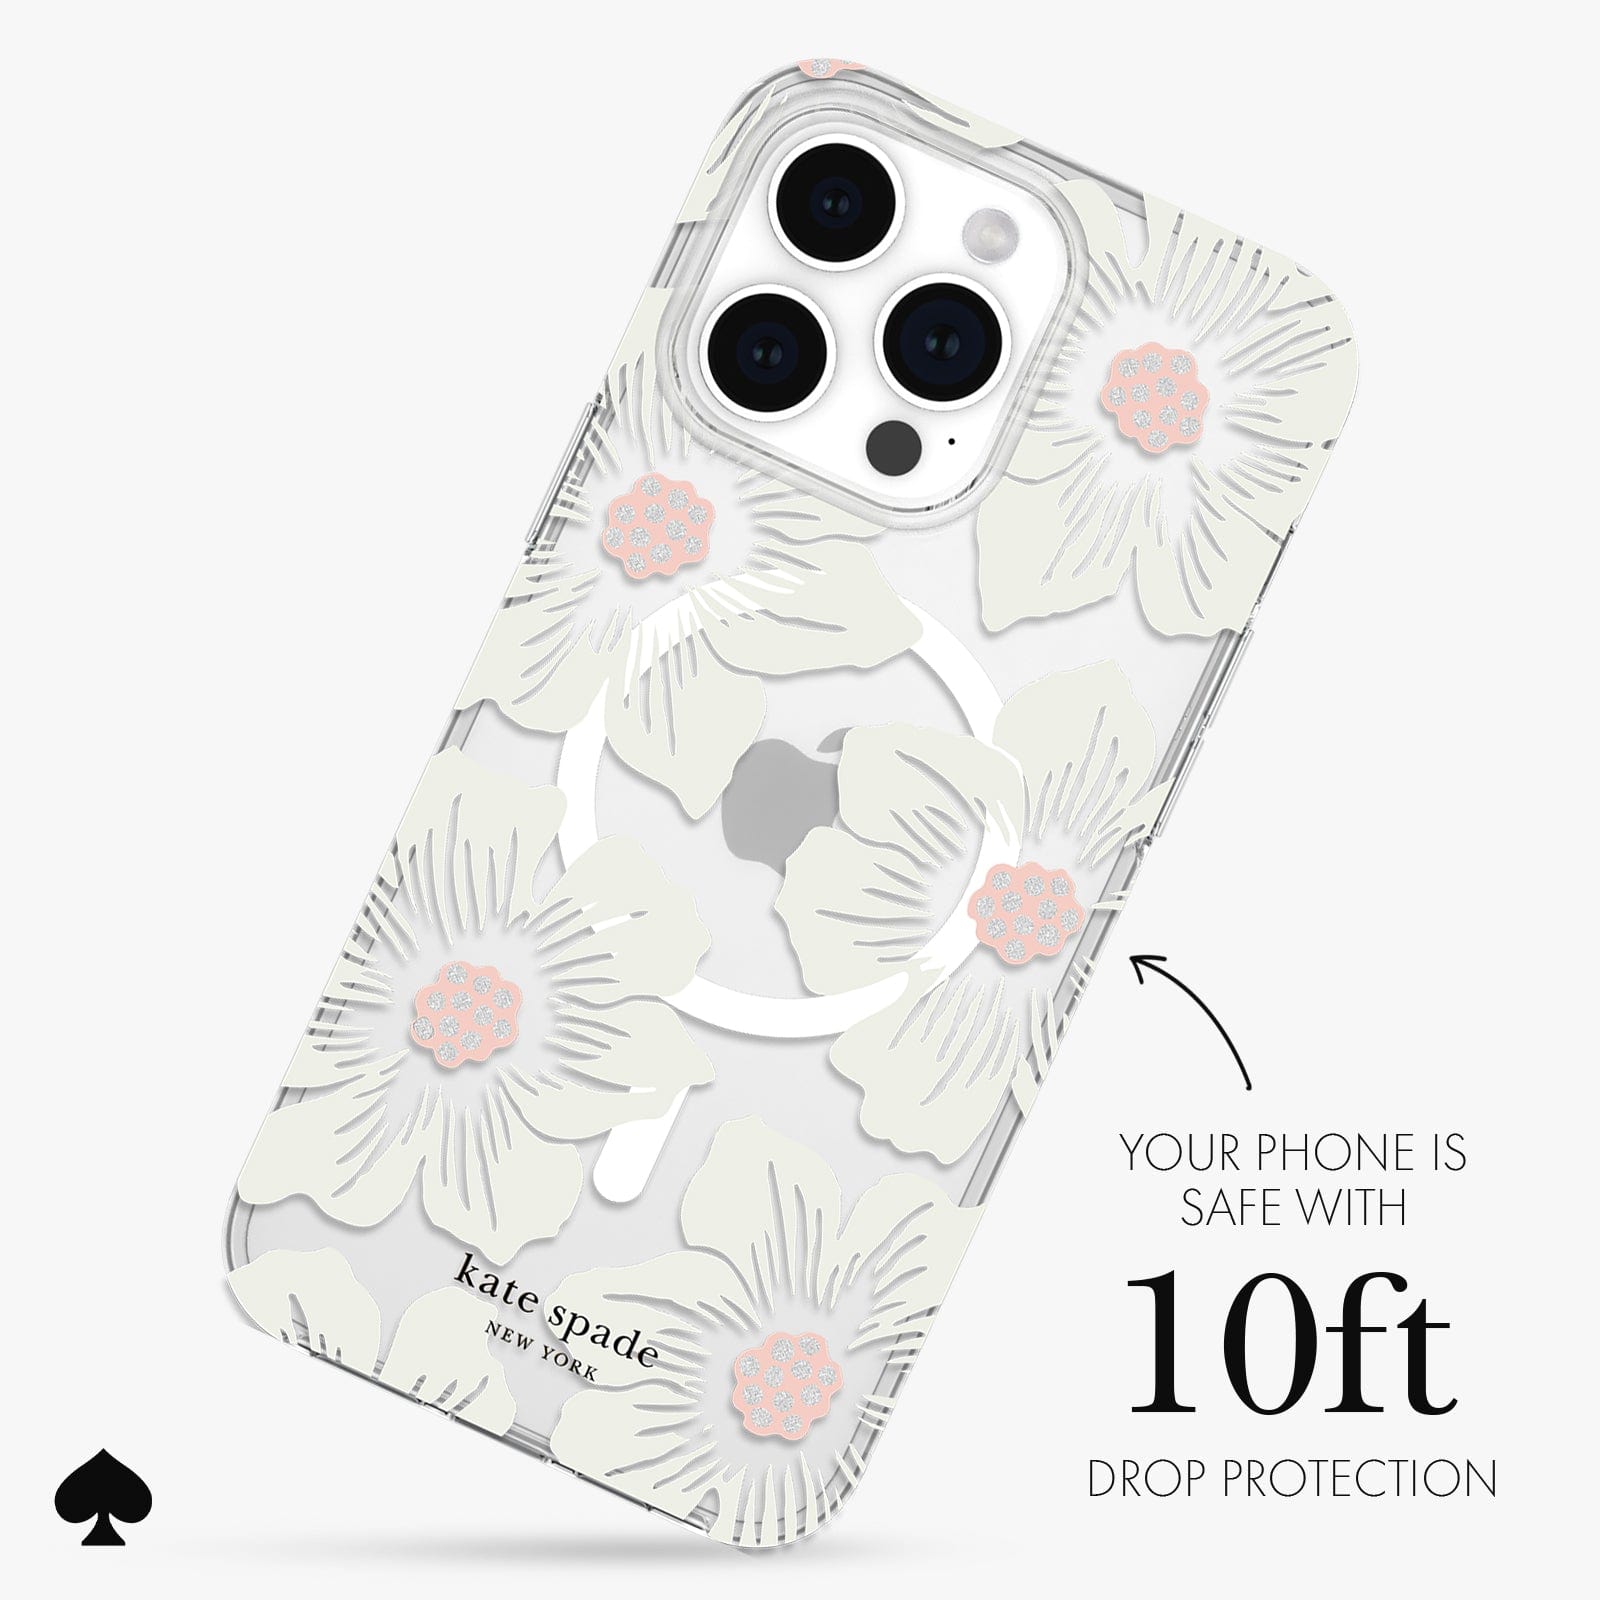 YOUR PHONE IS SAFE WITH 10 FT DROP PROTECTION